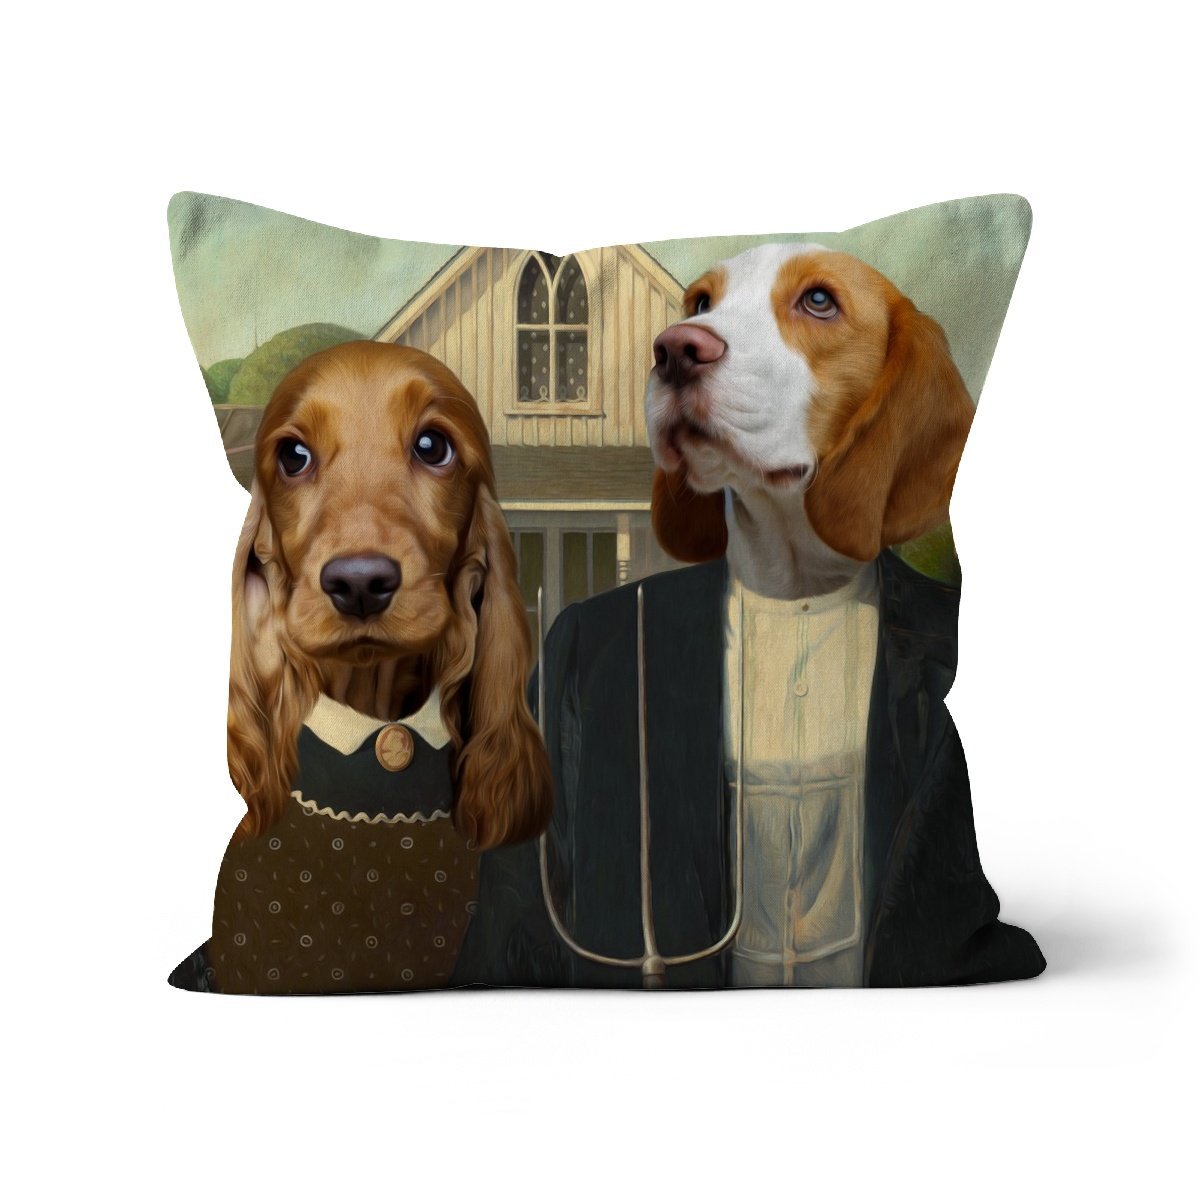 American Gothic: Custom Pet Cushion - Paw and Glory: dog pillows personalized, pet face pillows, dog photo on pillow, custom cat pillows, pillow with pet picture